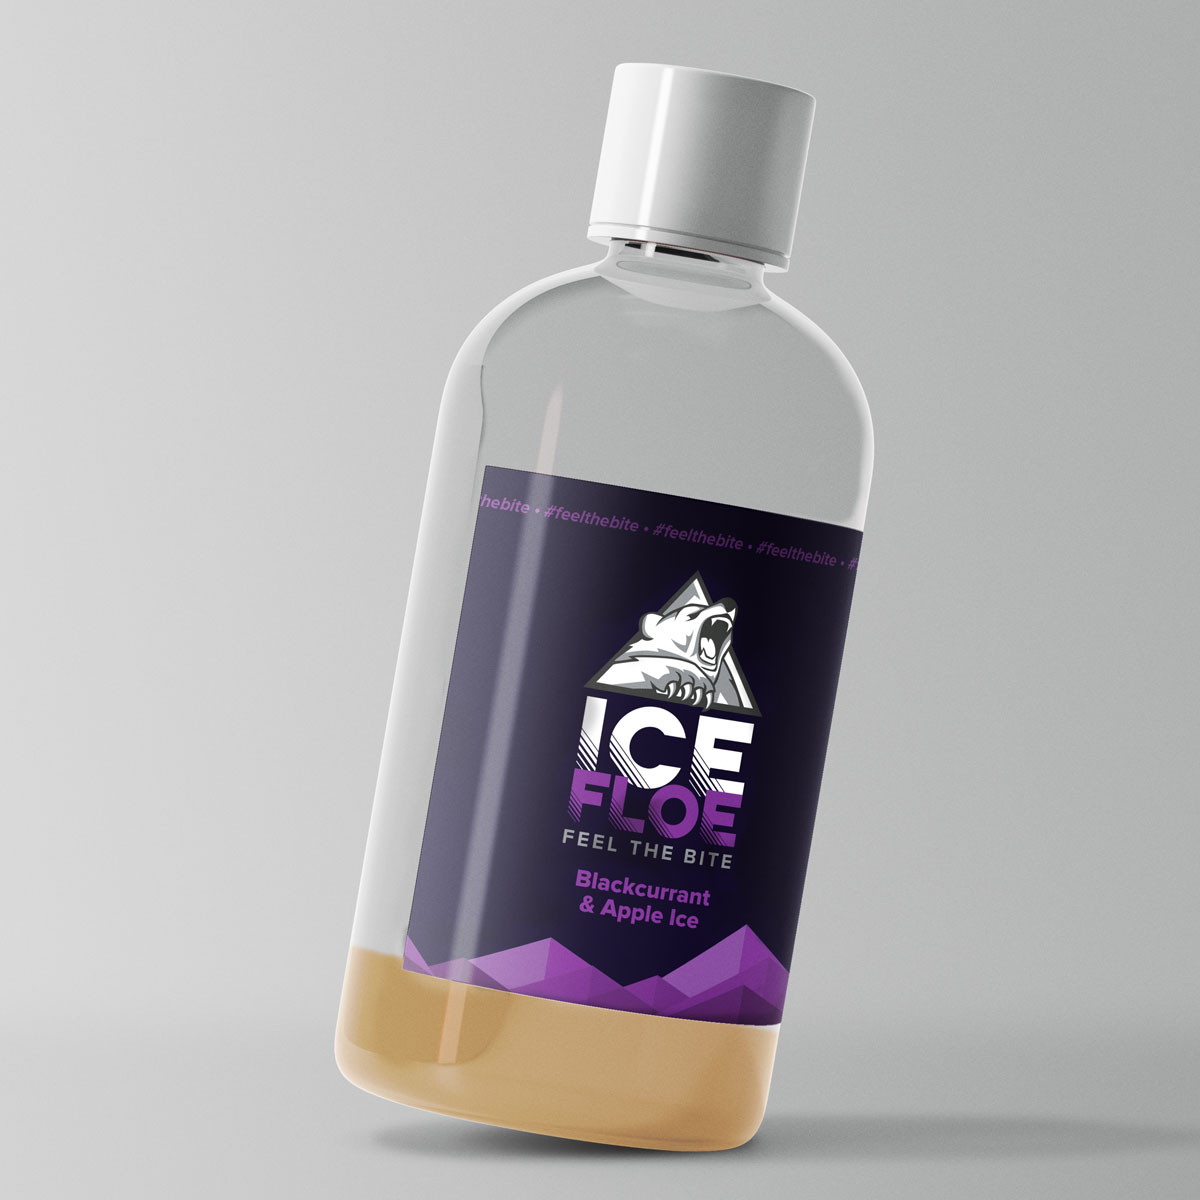 Blackcurrant & Apple Ice Flavour Shot by Ice Floe - 250ml